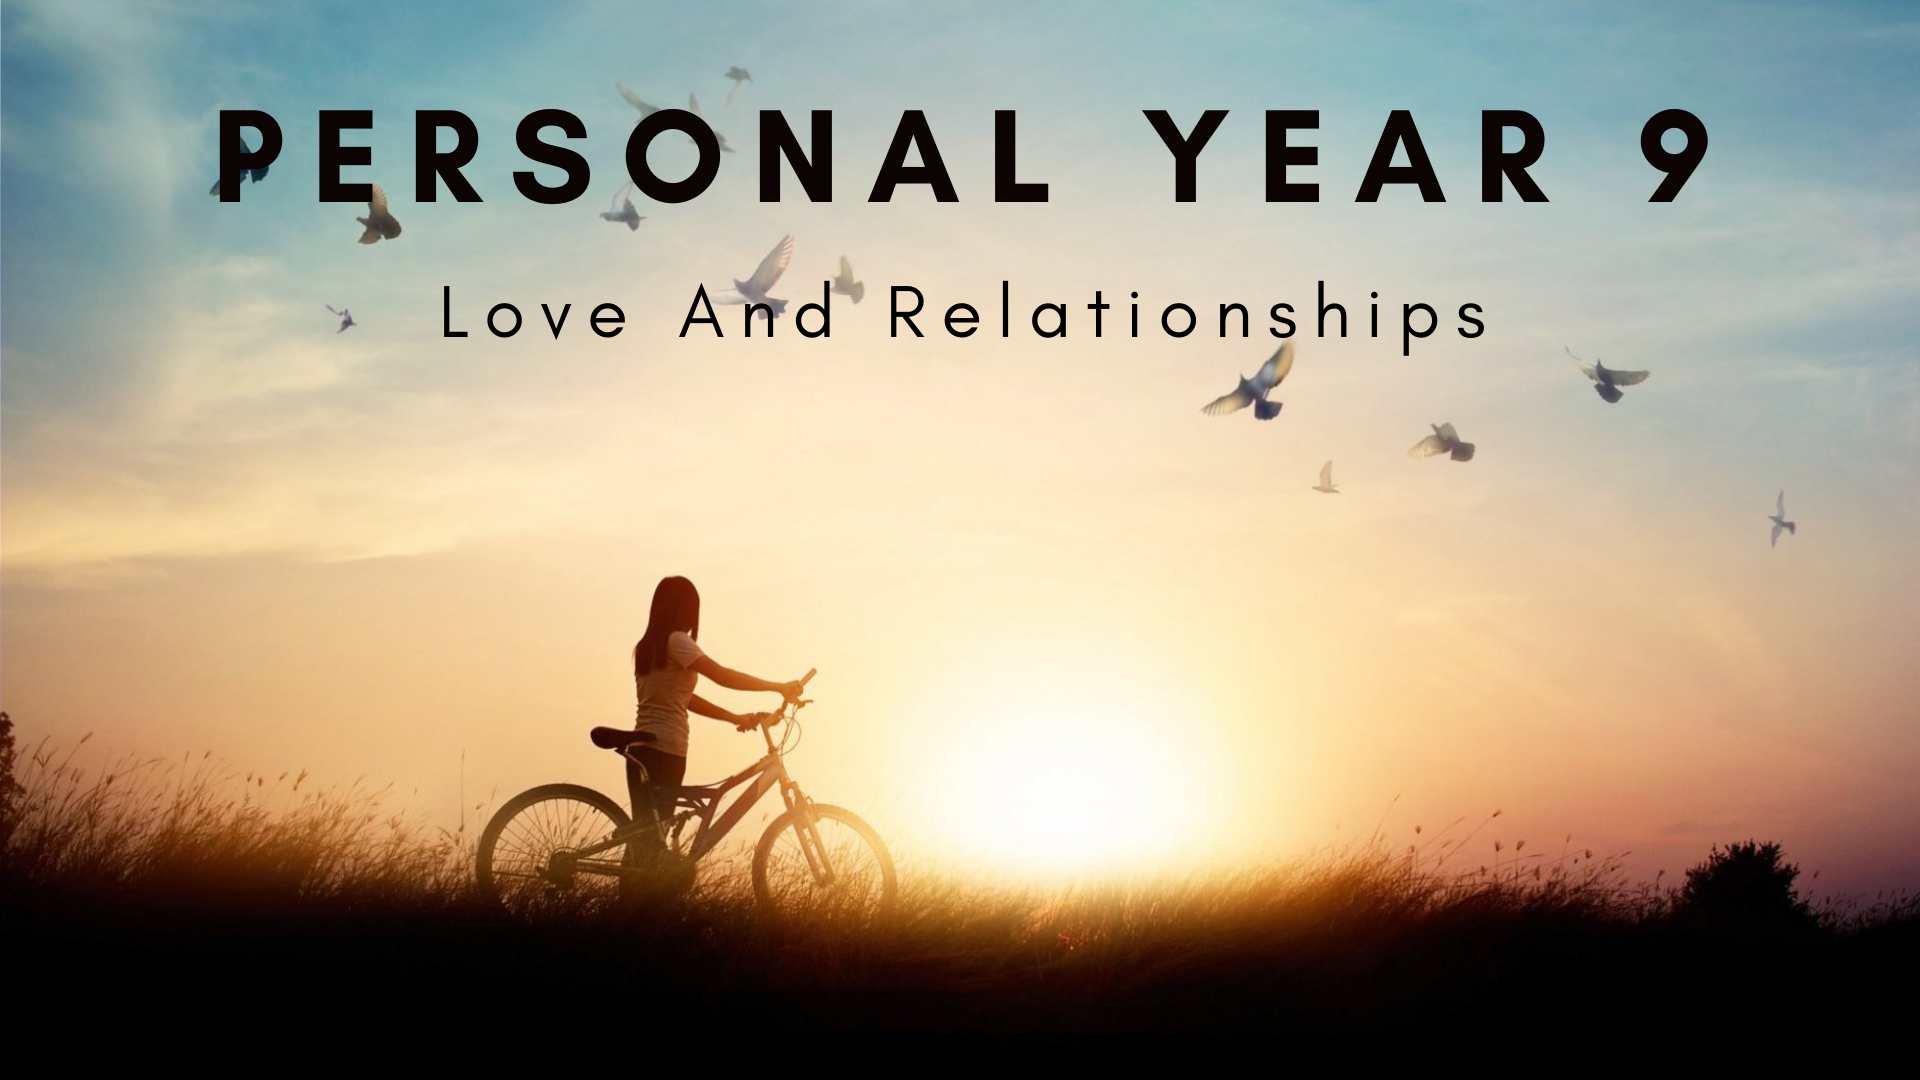 A woman with a bike looking at the sunset with words Personal Year 9 Love And Relationships